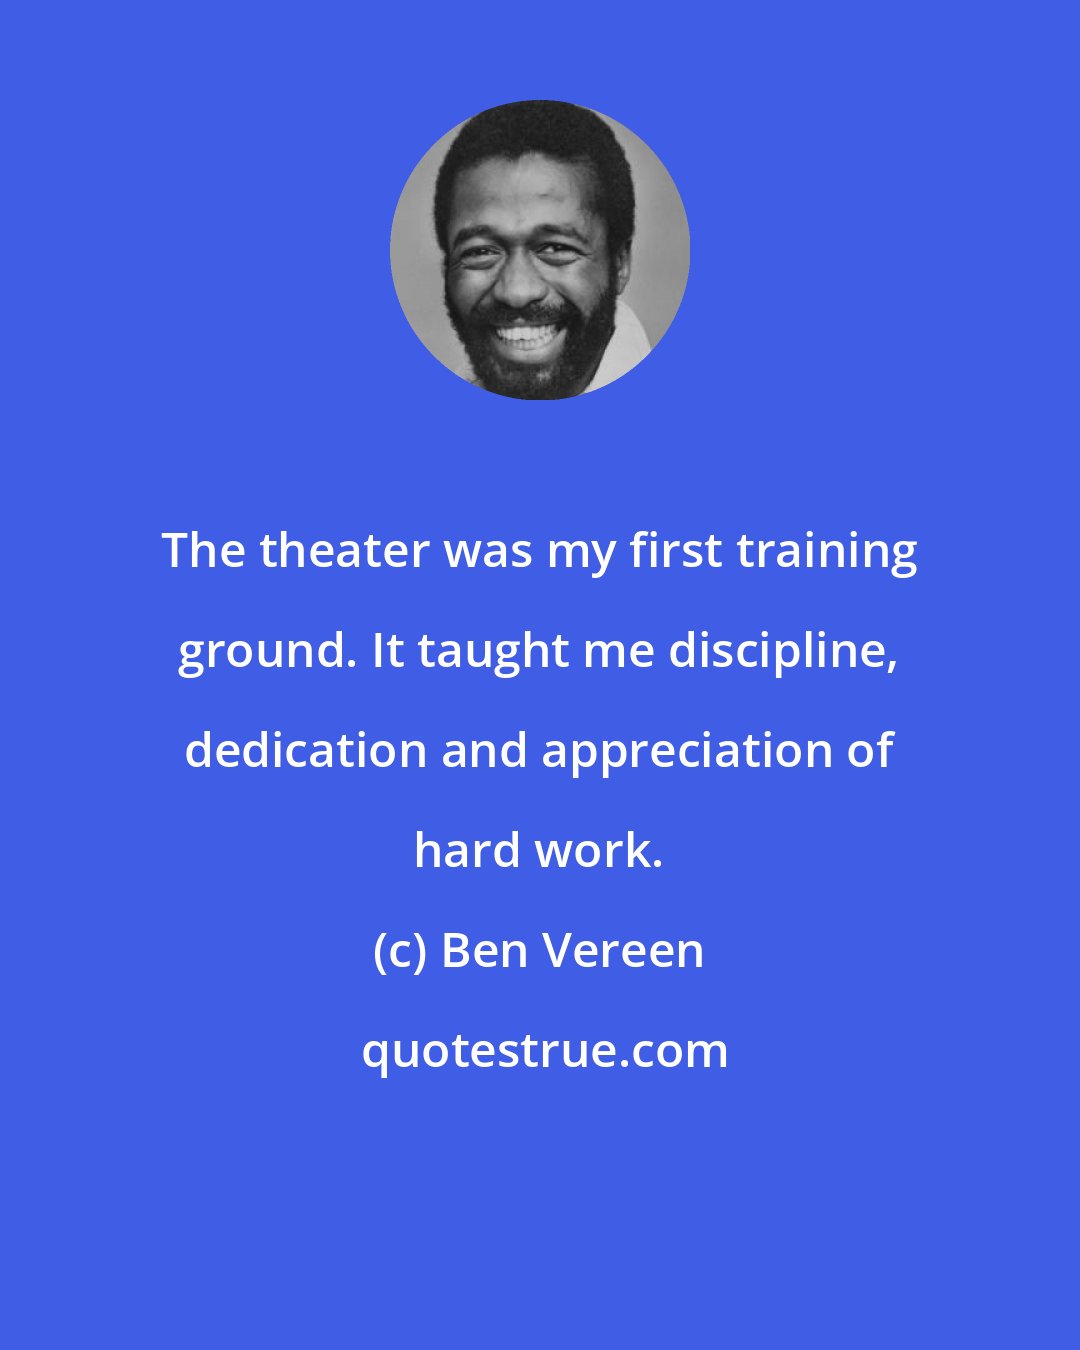 Ben Vereen: The theater was my first training ground. It taught me discipline, dedication and appreciation of hard work.